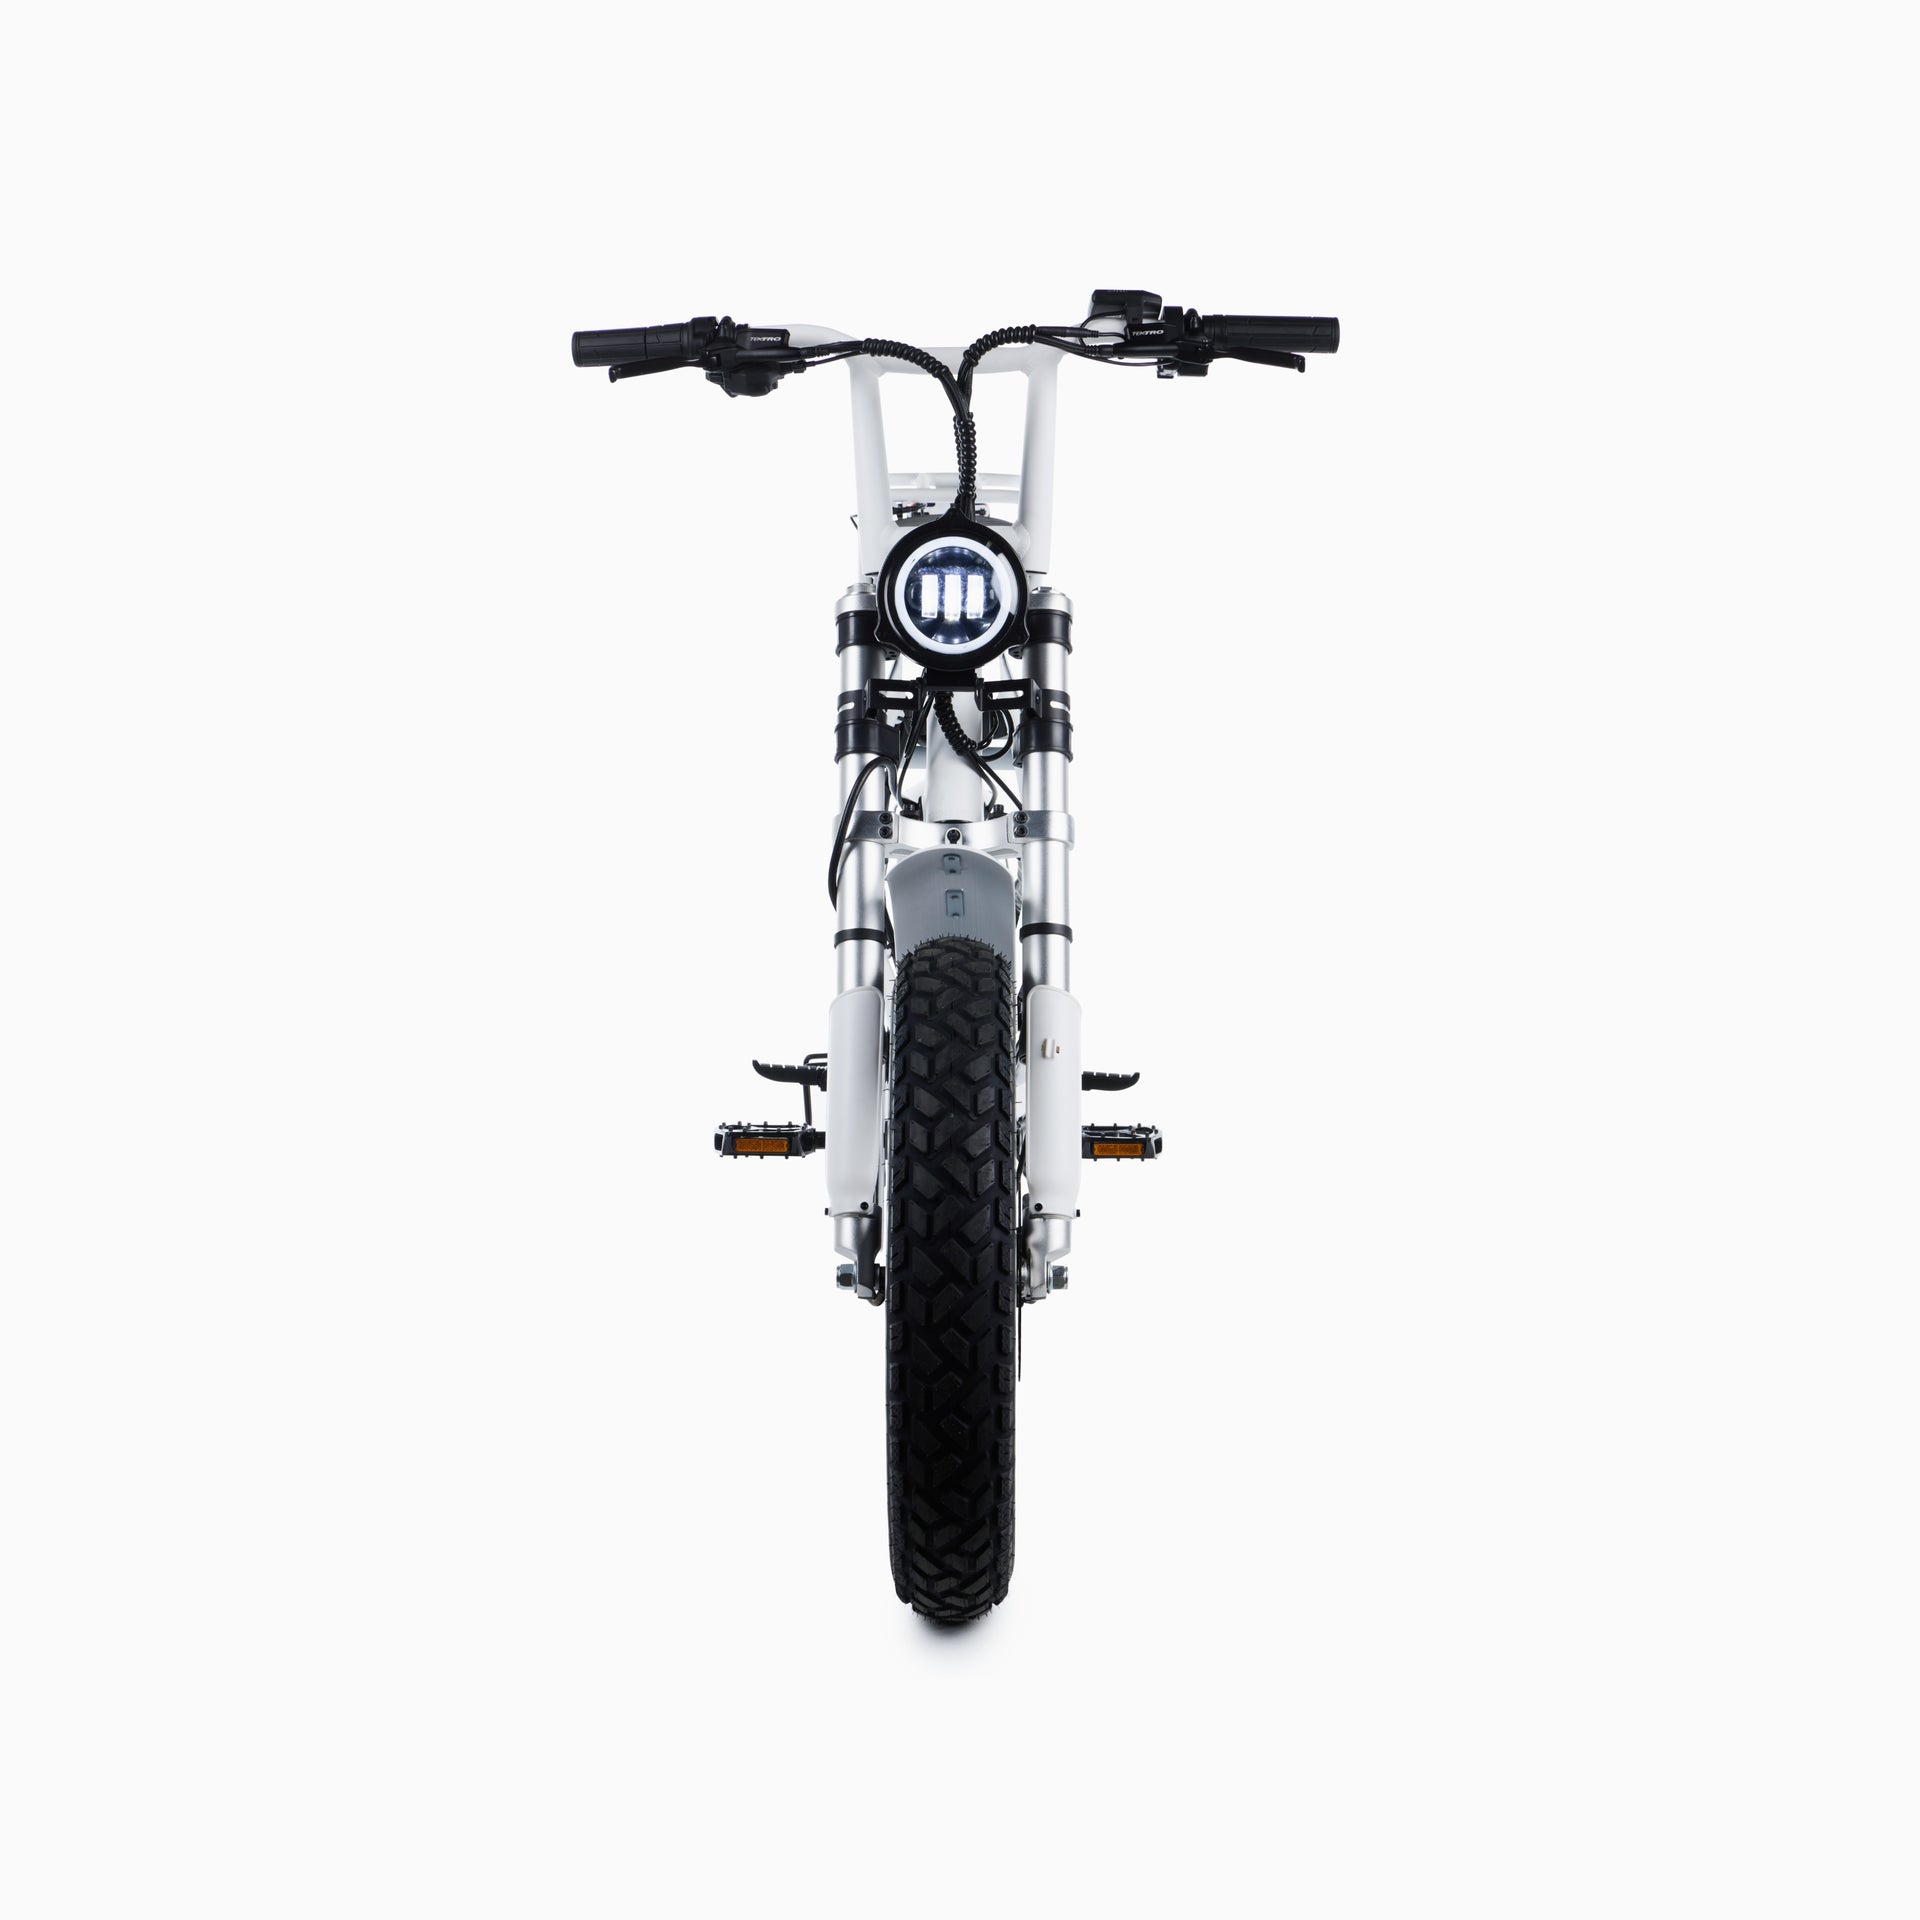 This interesting 28 MPH e-bike conversion kit uses a totally new